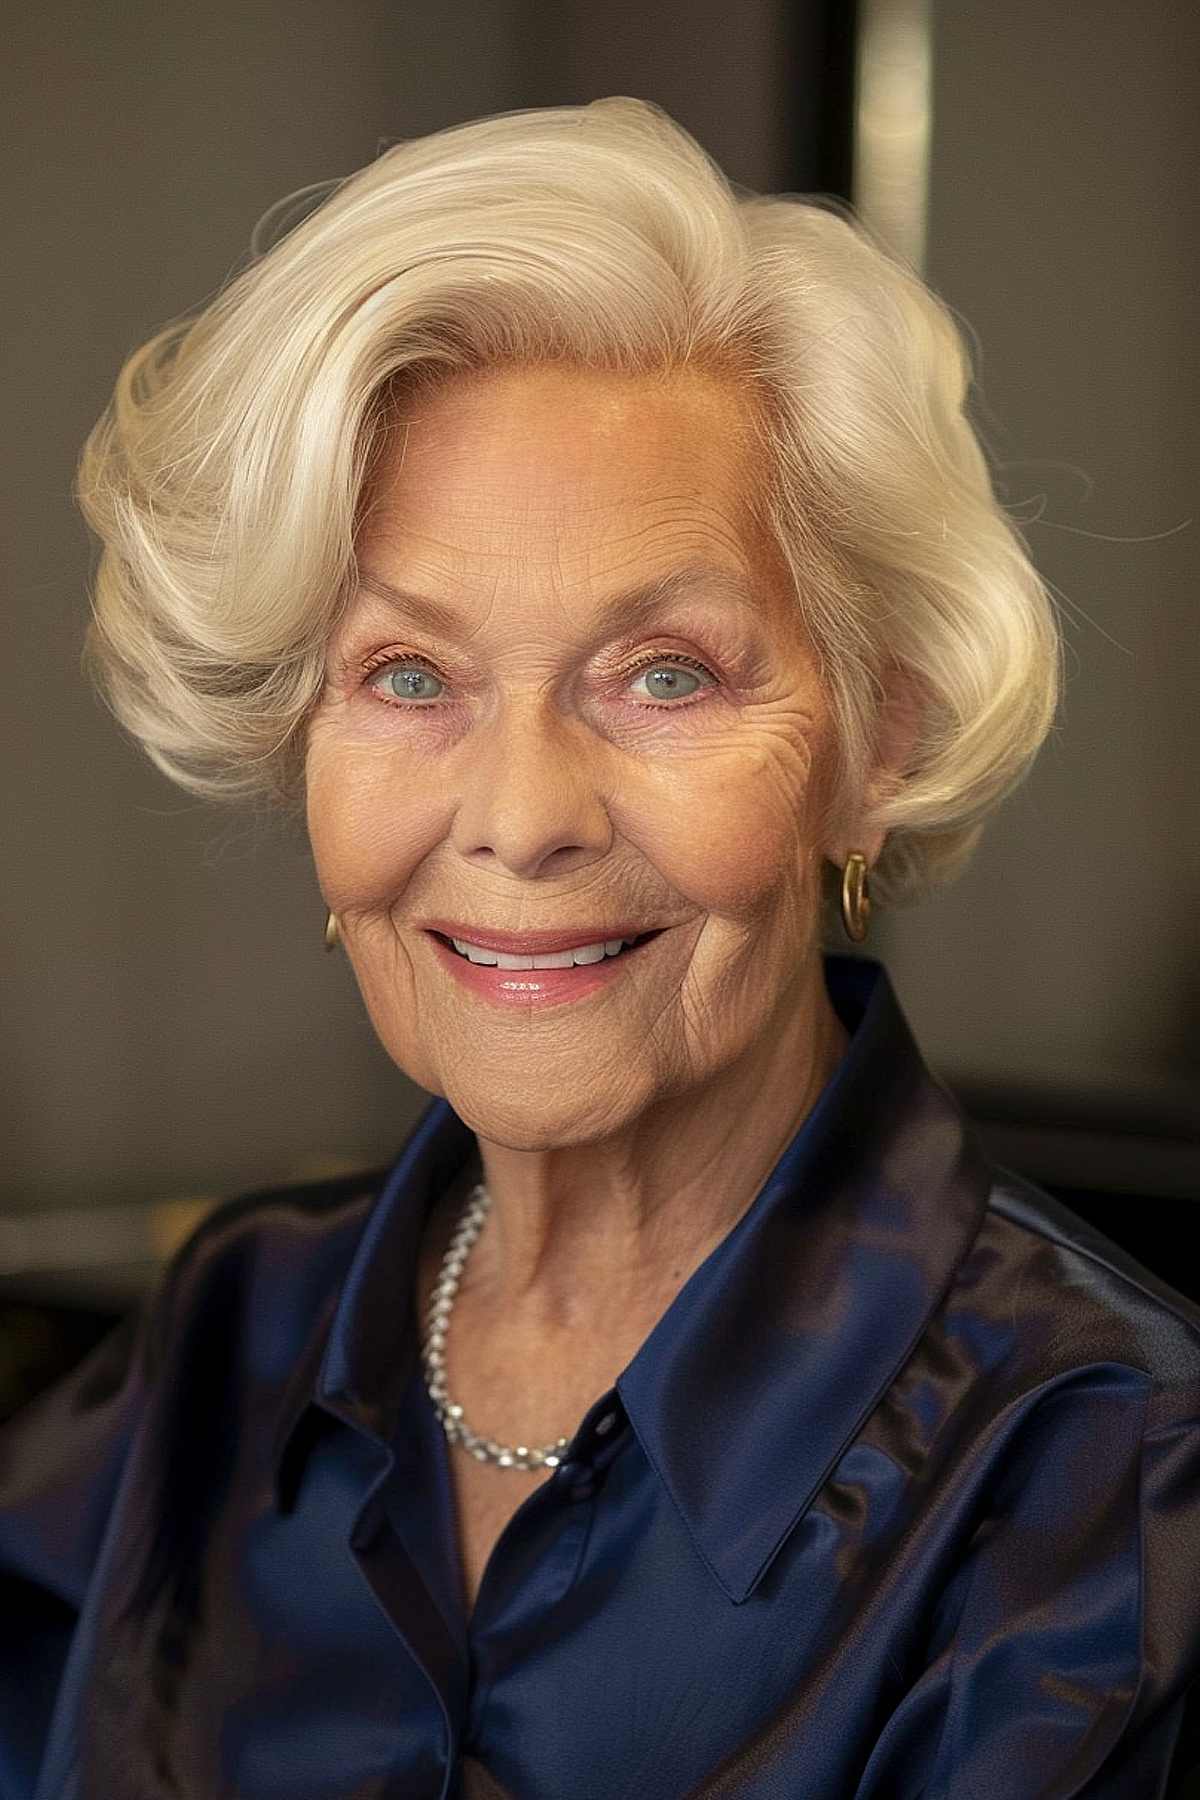 Airy and voluminous Chanel bob hairstyle for women over 70.